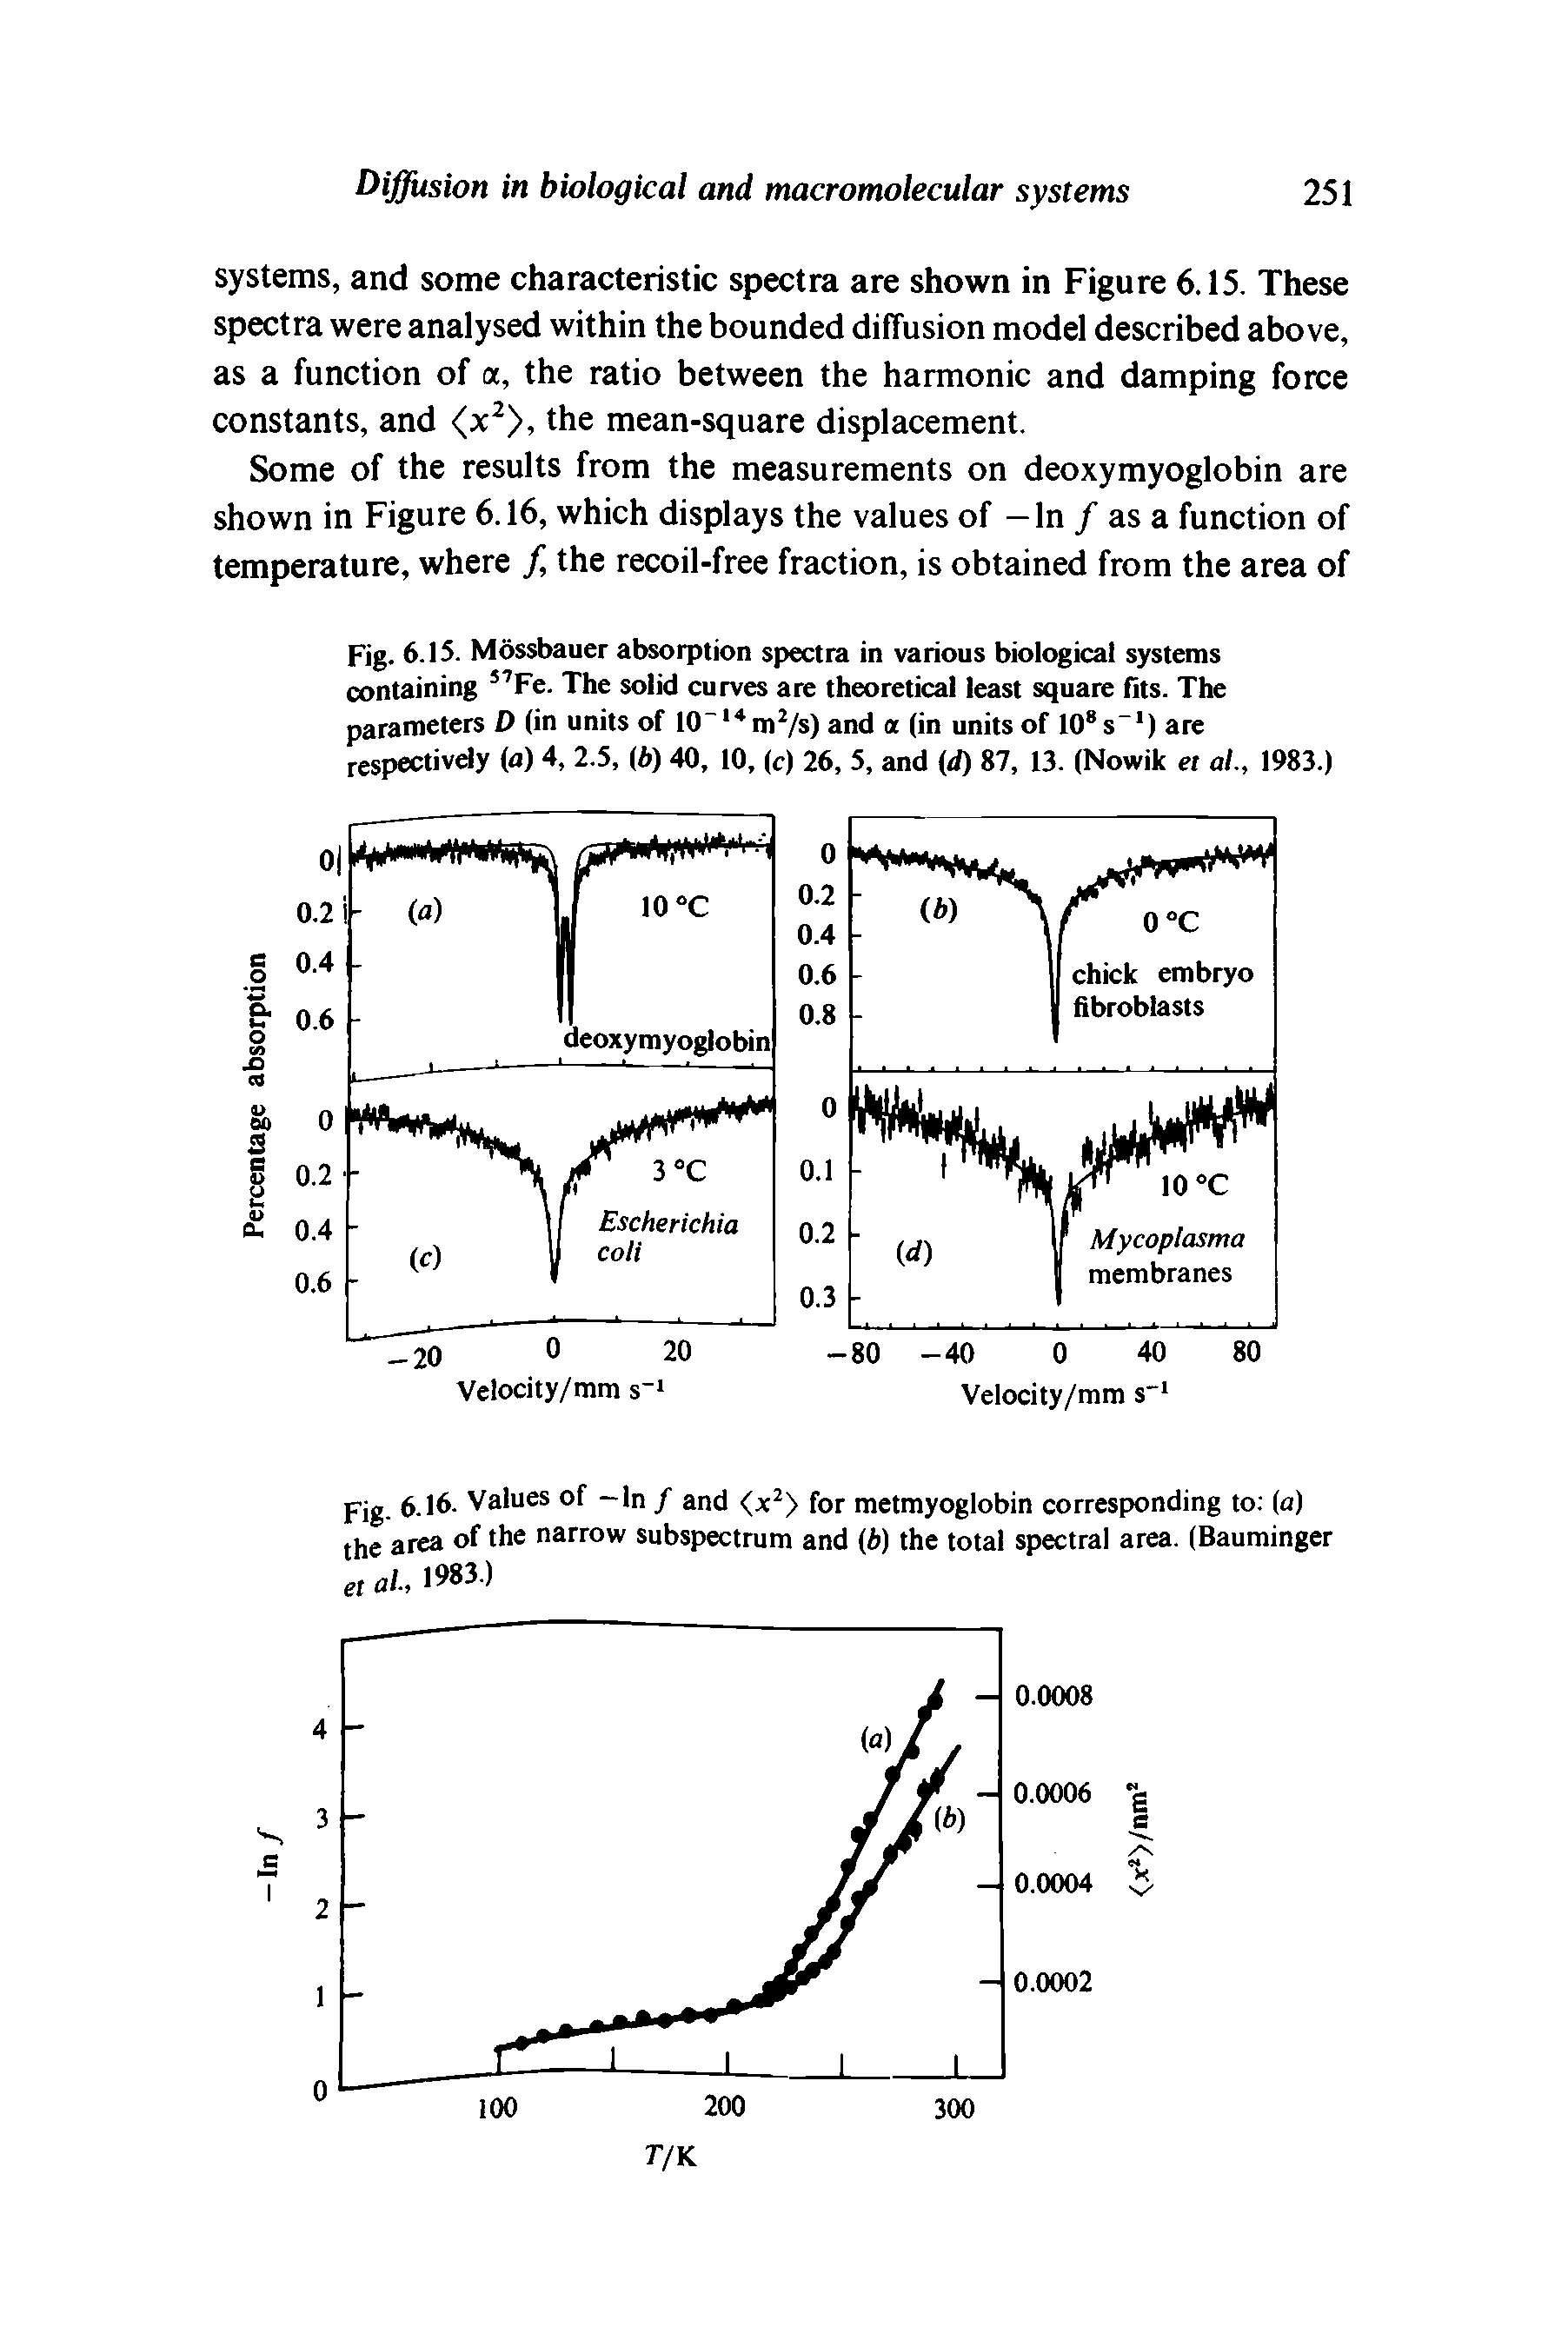 Fig. 6.15. Mossbauer absorption spectra in various biological systems containing Fe. The solid curves are theoretical least square fits. The parameters D (in units of 10" mVs) and a (in units of 10 s ) are respectivdy (a) 4, 2.5, (i) 40, 10, (c) 26, 5, and (d) 87, 13. (Nowik et a ., 1983.)...